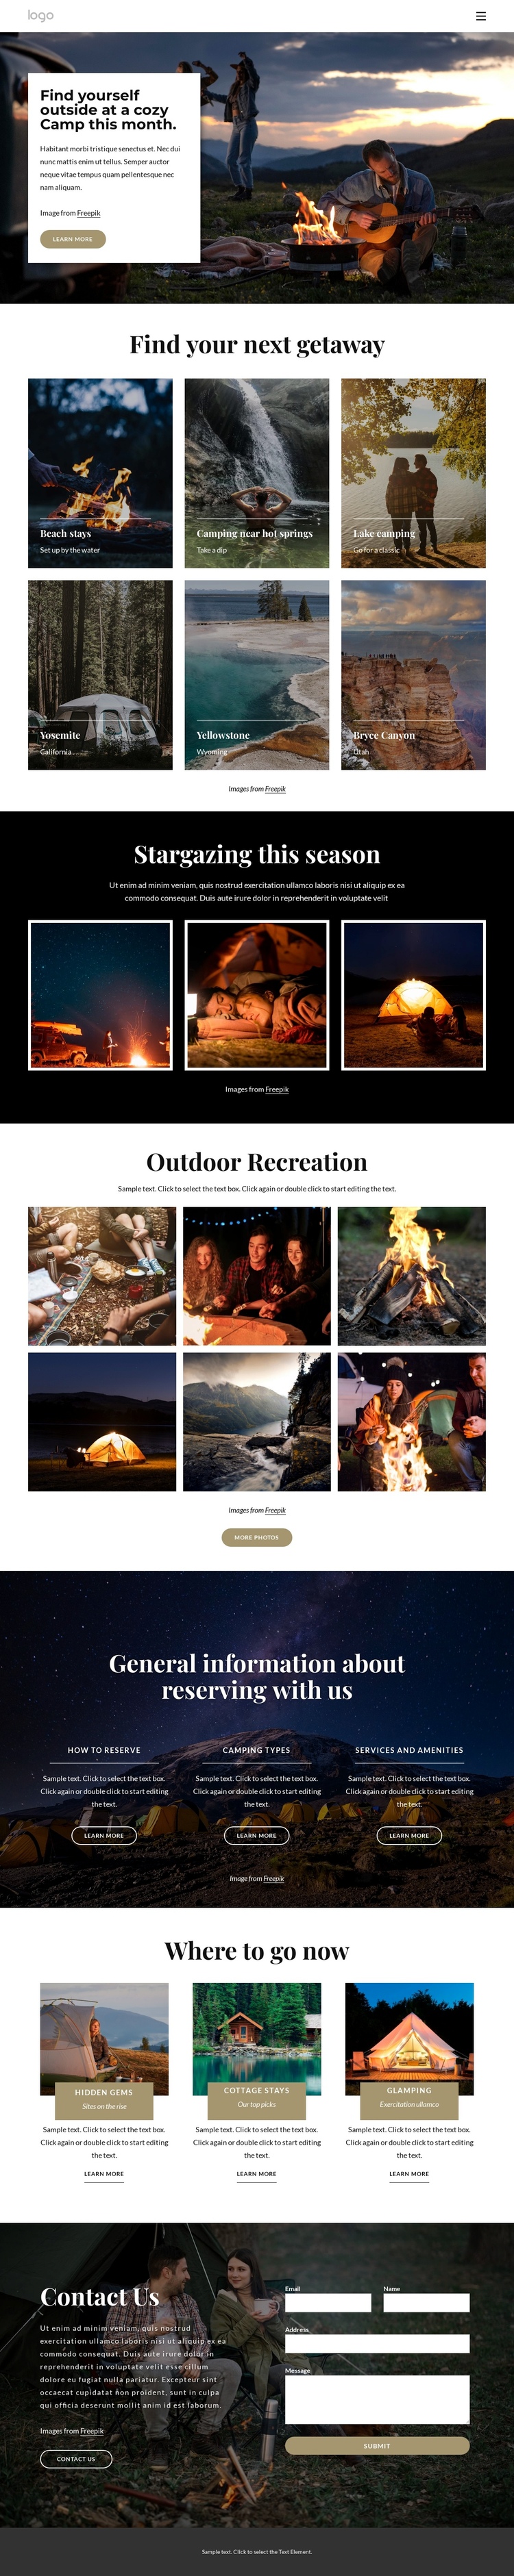 Going on a camping trip Website Builder Software